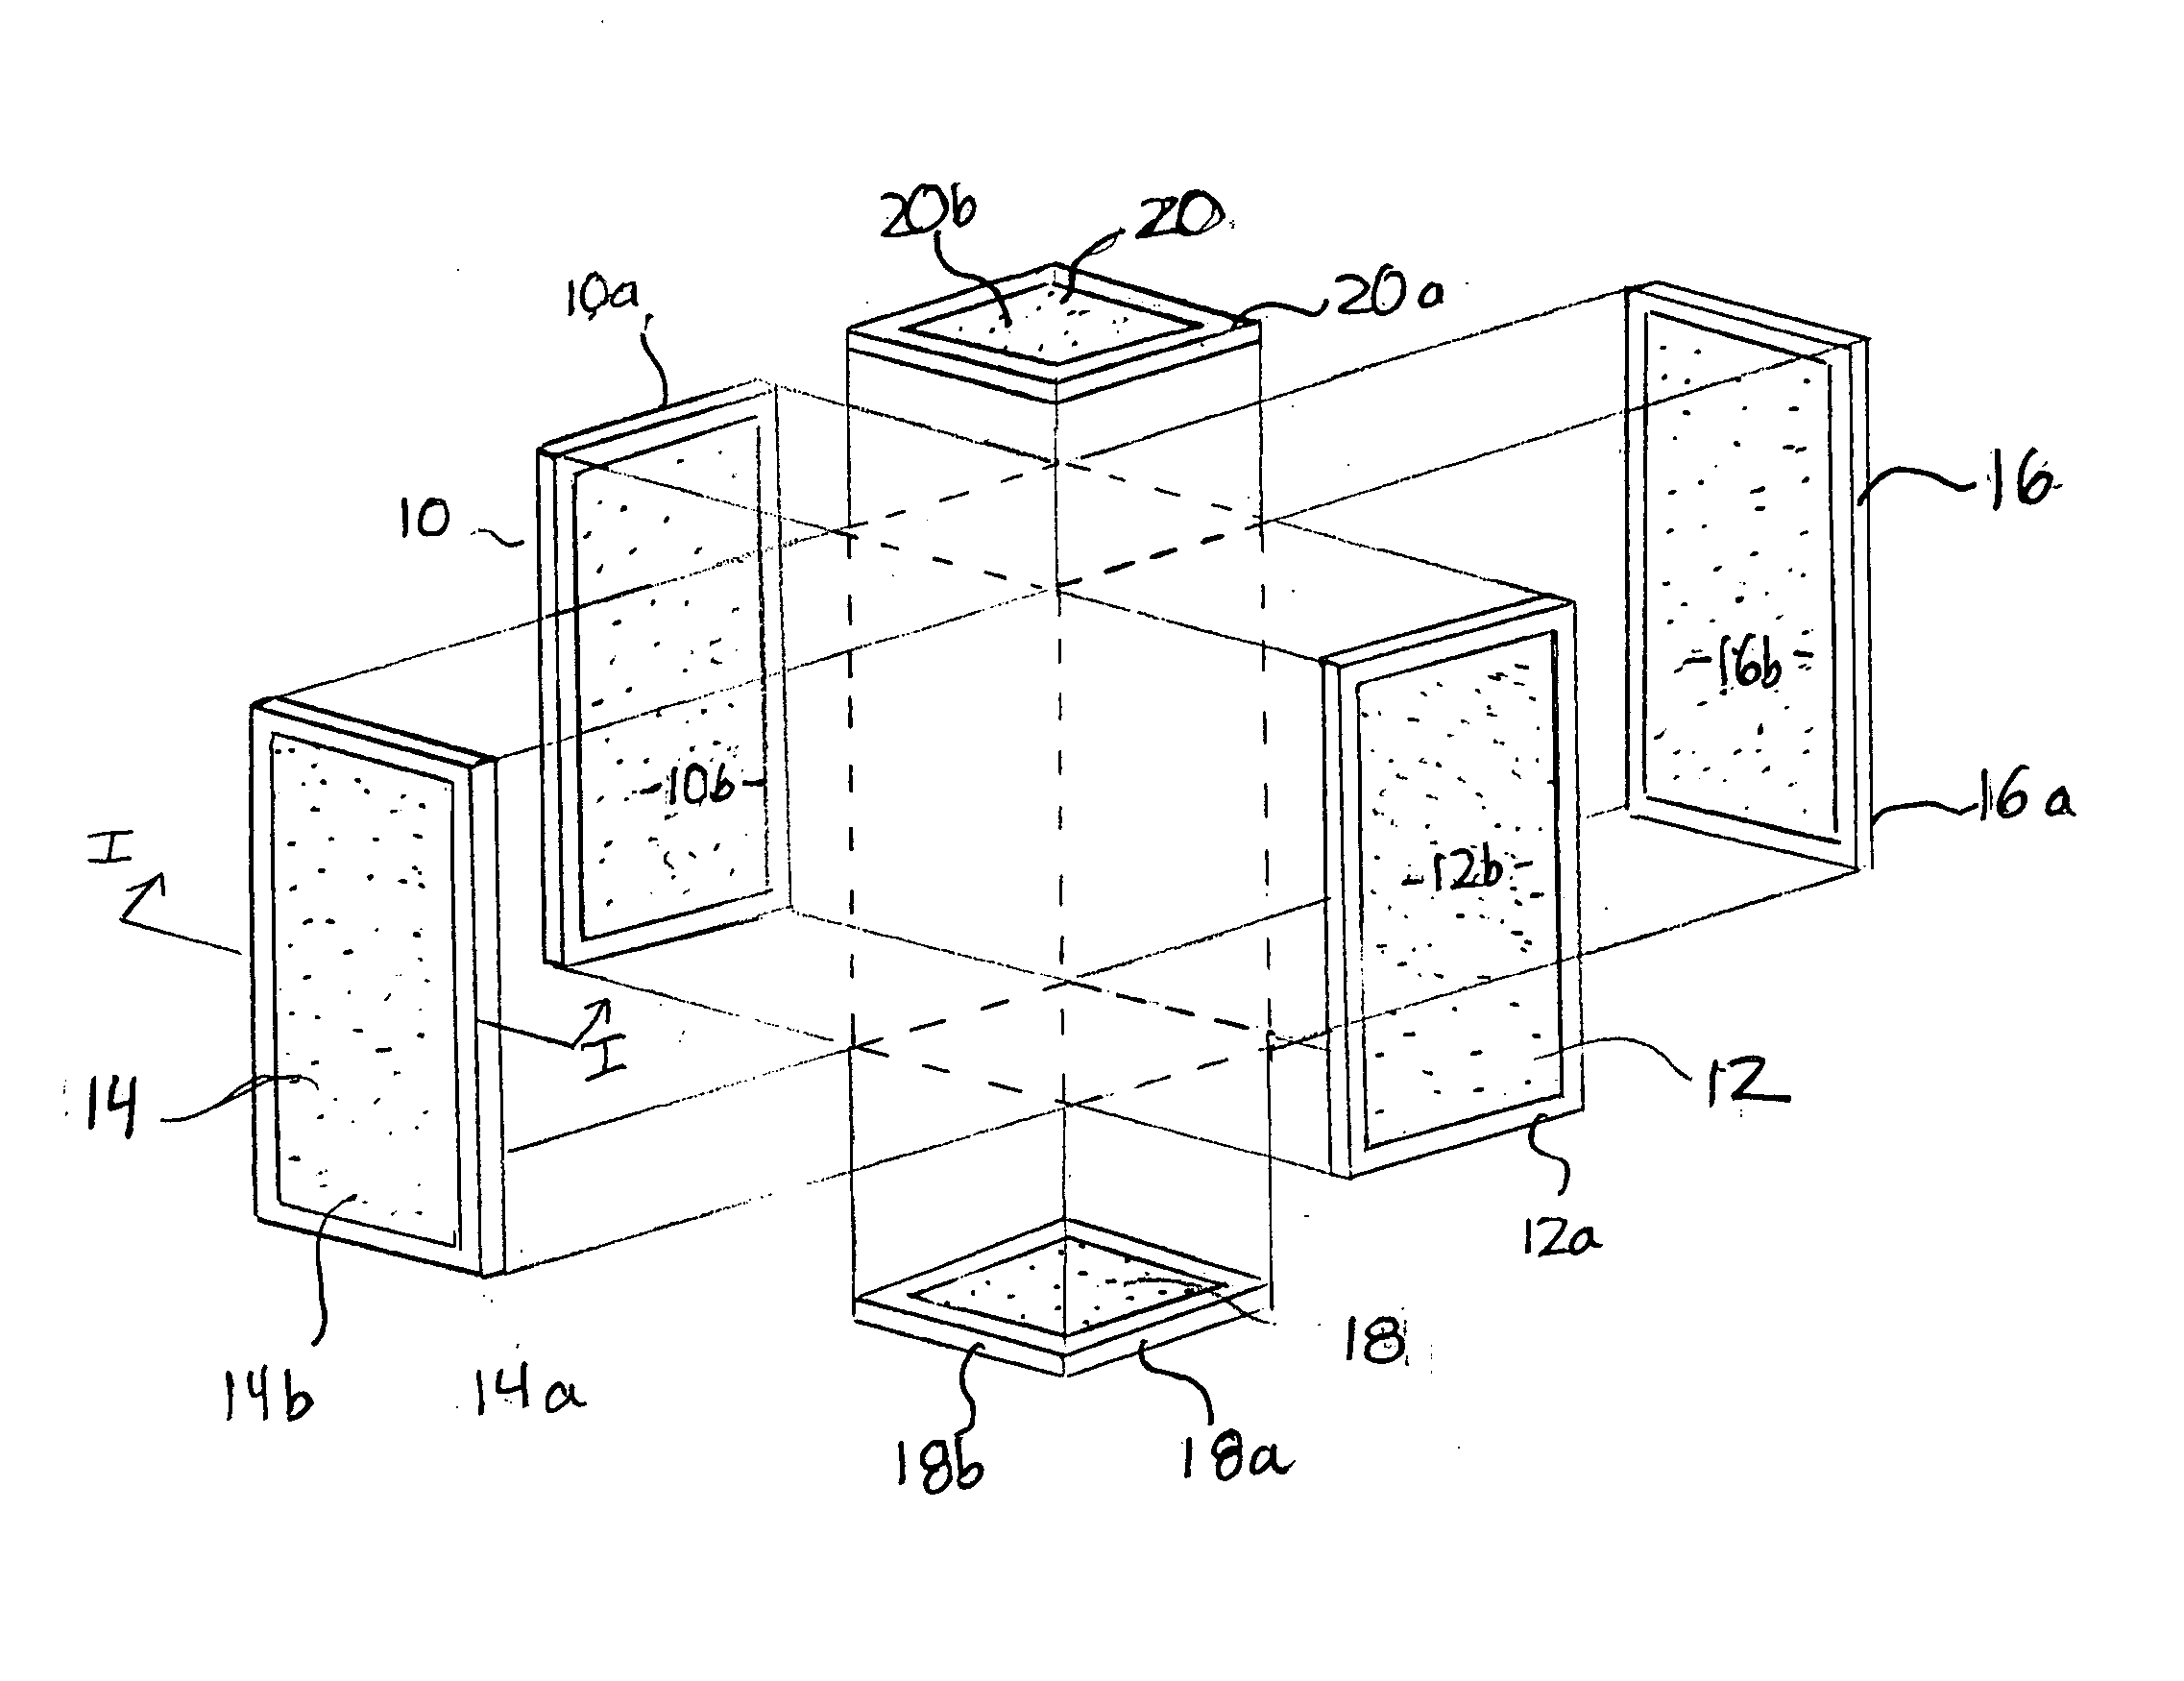 Interlocking component assembly system